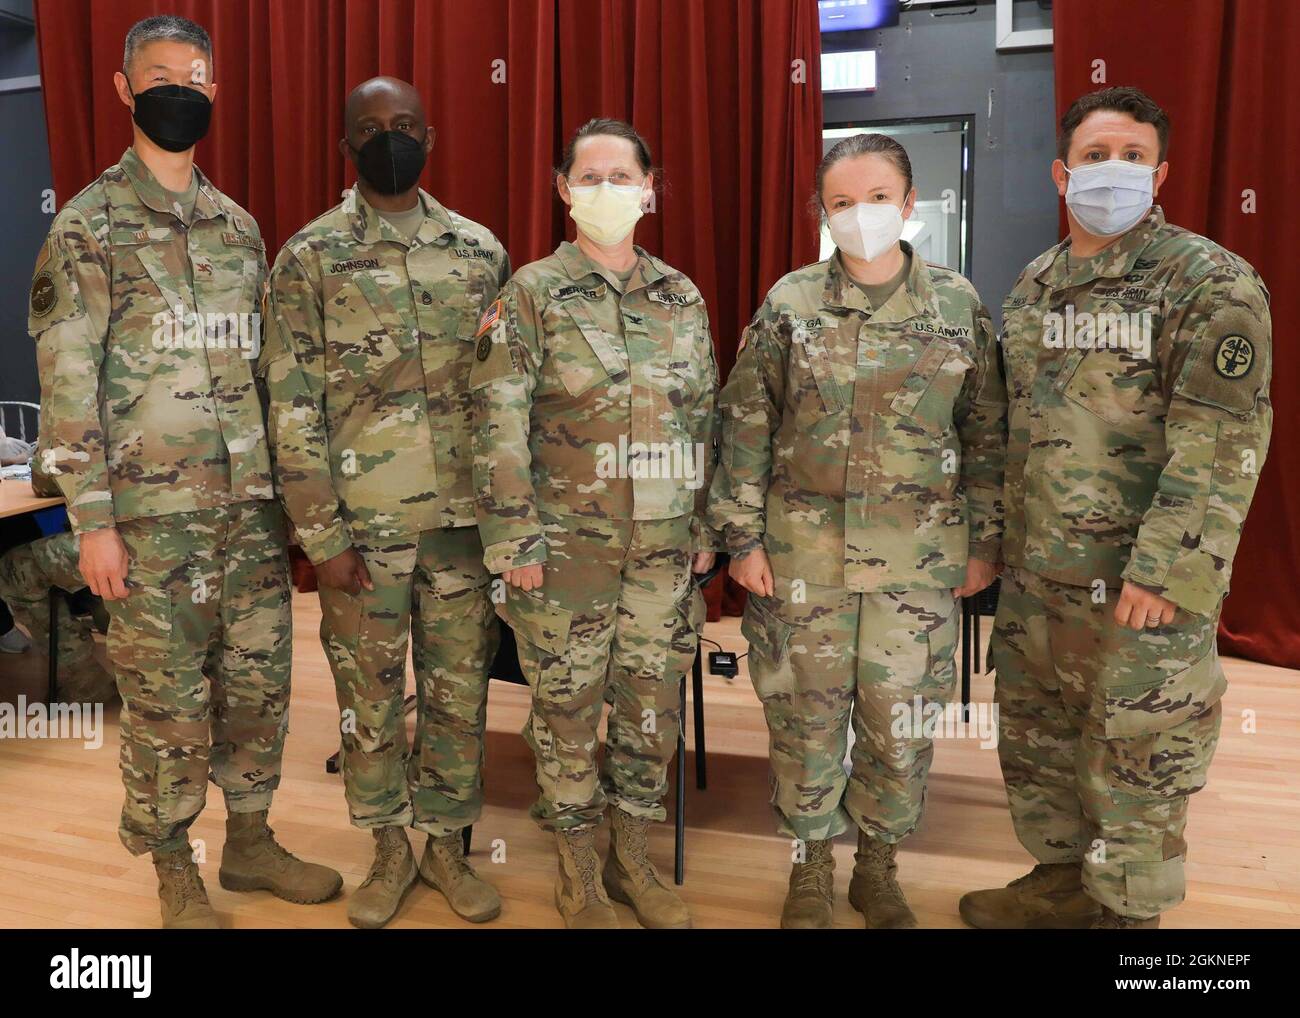 (From left) U.S. Air Force Col. Peter Kim, Chief Medical Officer, Landstuhl Regional Medical Center, U.S. Army Sgt. 1st Class Eldon Johnson, noncommissioned officer in charge, 452nd Combat Support Hospital (CSH), 330th Medical Brigade, 807th Medical Command, U.S. Army Reserve, U.S. Army Col. Ines Berger, commander, 452nd CSH, U.S. Maj. Marielos Vega, chief, Quality and Safety, LRMC, and Sgt. 1st Class Jeffrey Hicks, noncommissioned officer in charge, Department of Public Health, LRMC, stand at the LRMC COVID-19 vaccination site, where the 452nd CSH worked with LRMC to administer thousands of v Stock Photo